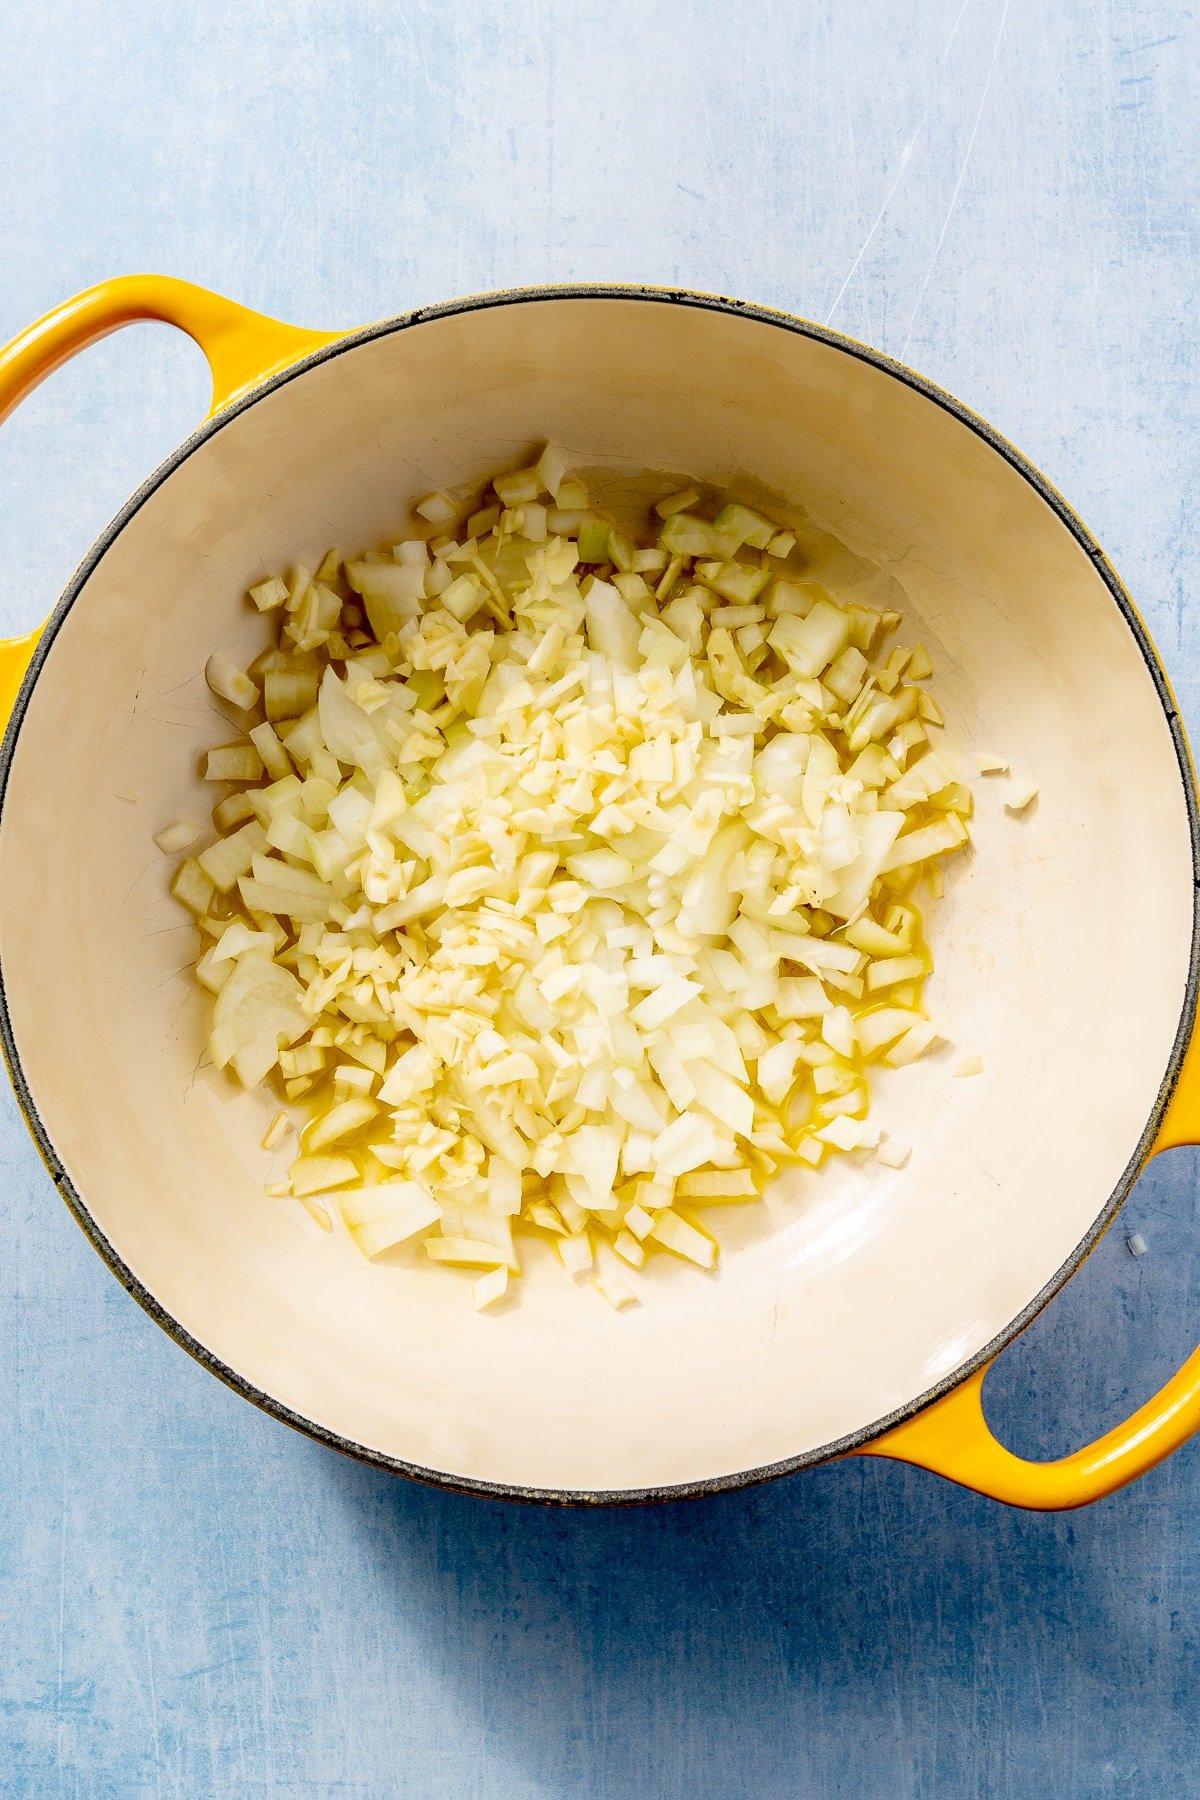 Diced onions, drizzled in oil, sit in a white enameled pot with yellow handles.